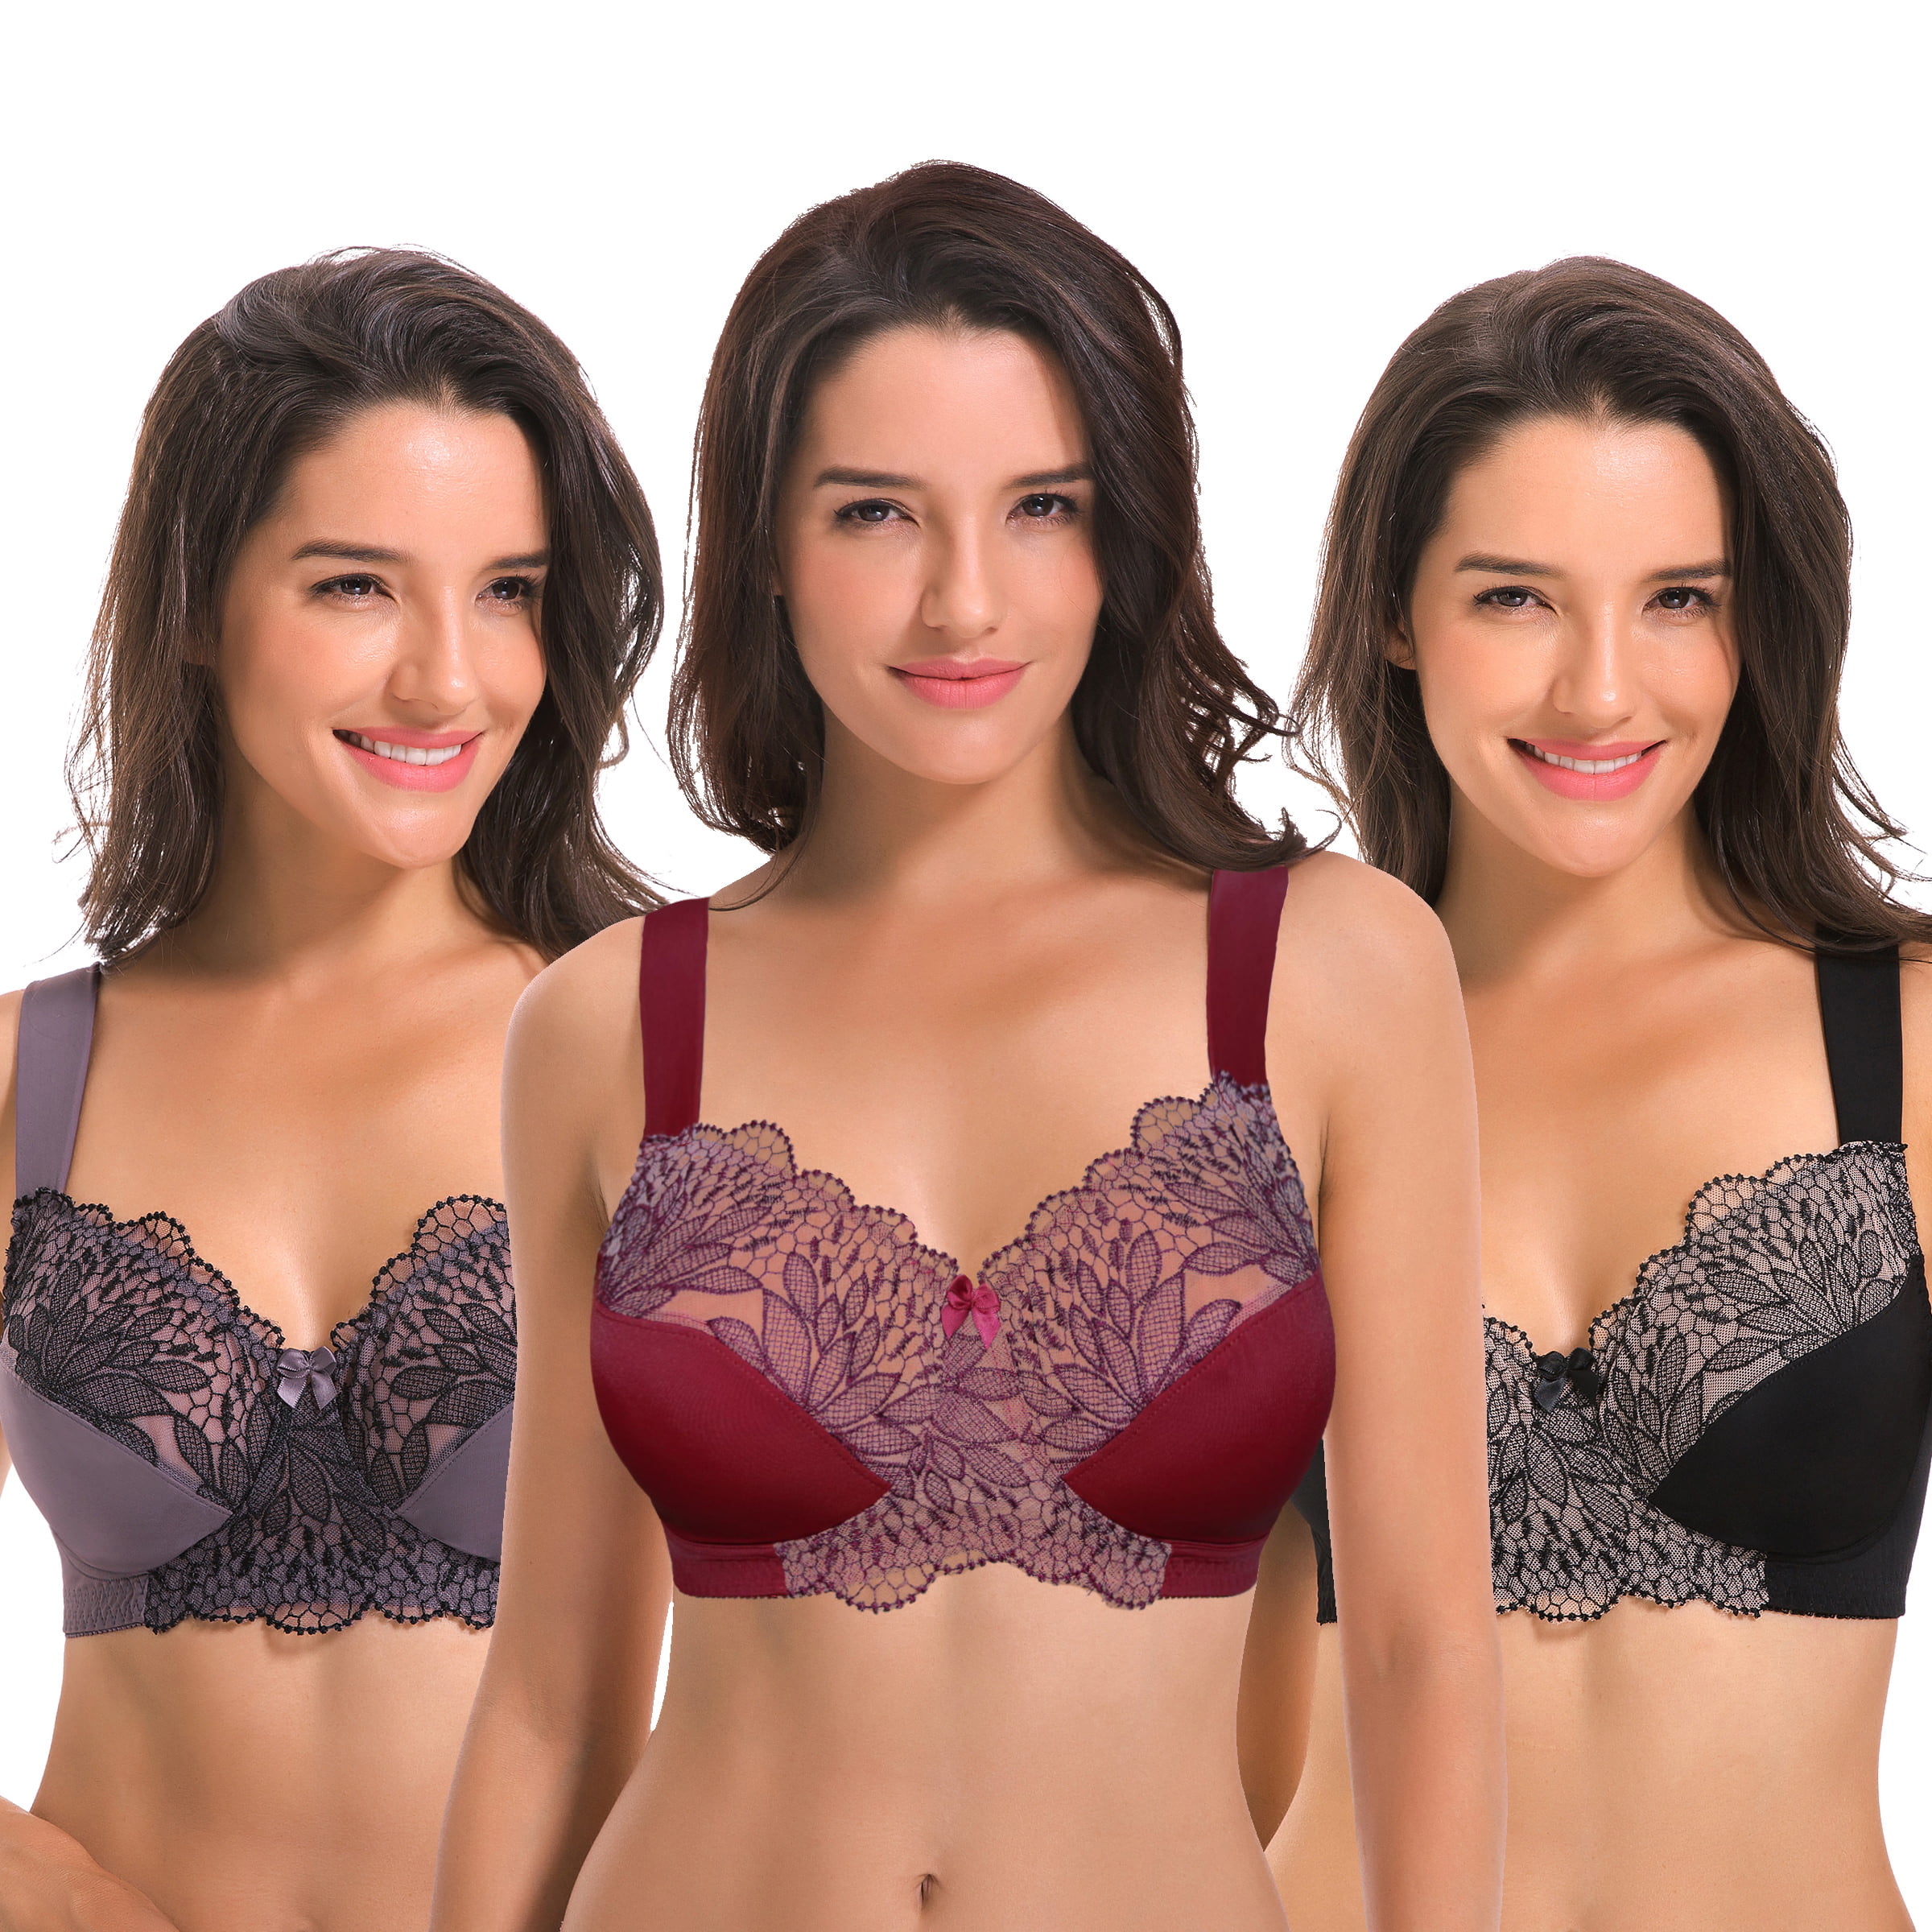 Details about   Curve Muse Plus Size Unlined Underwire Lace Bra with Padded Shoulder Straps-2PK 